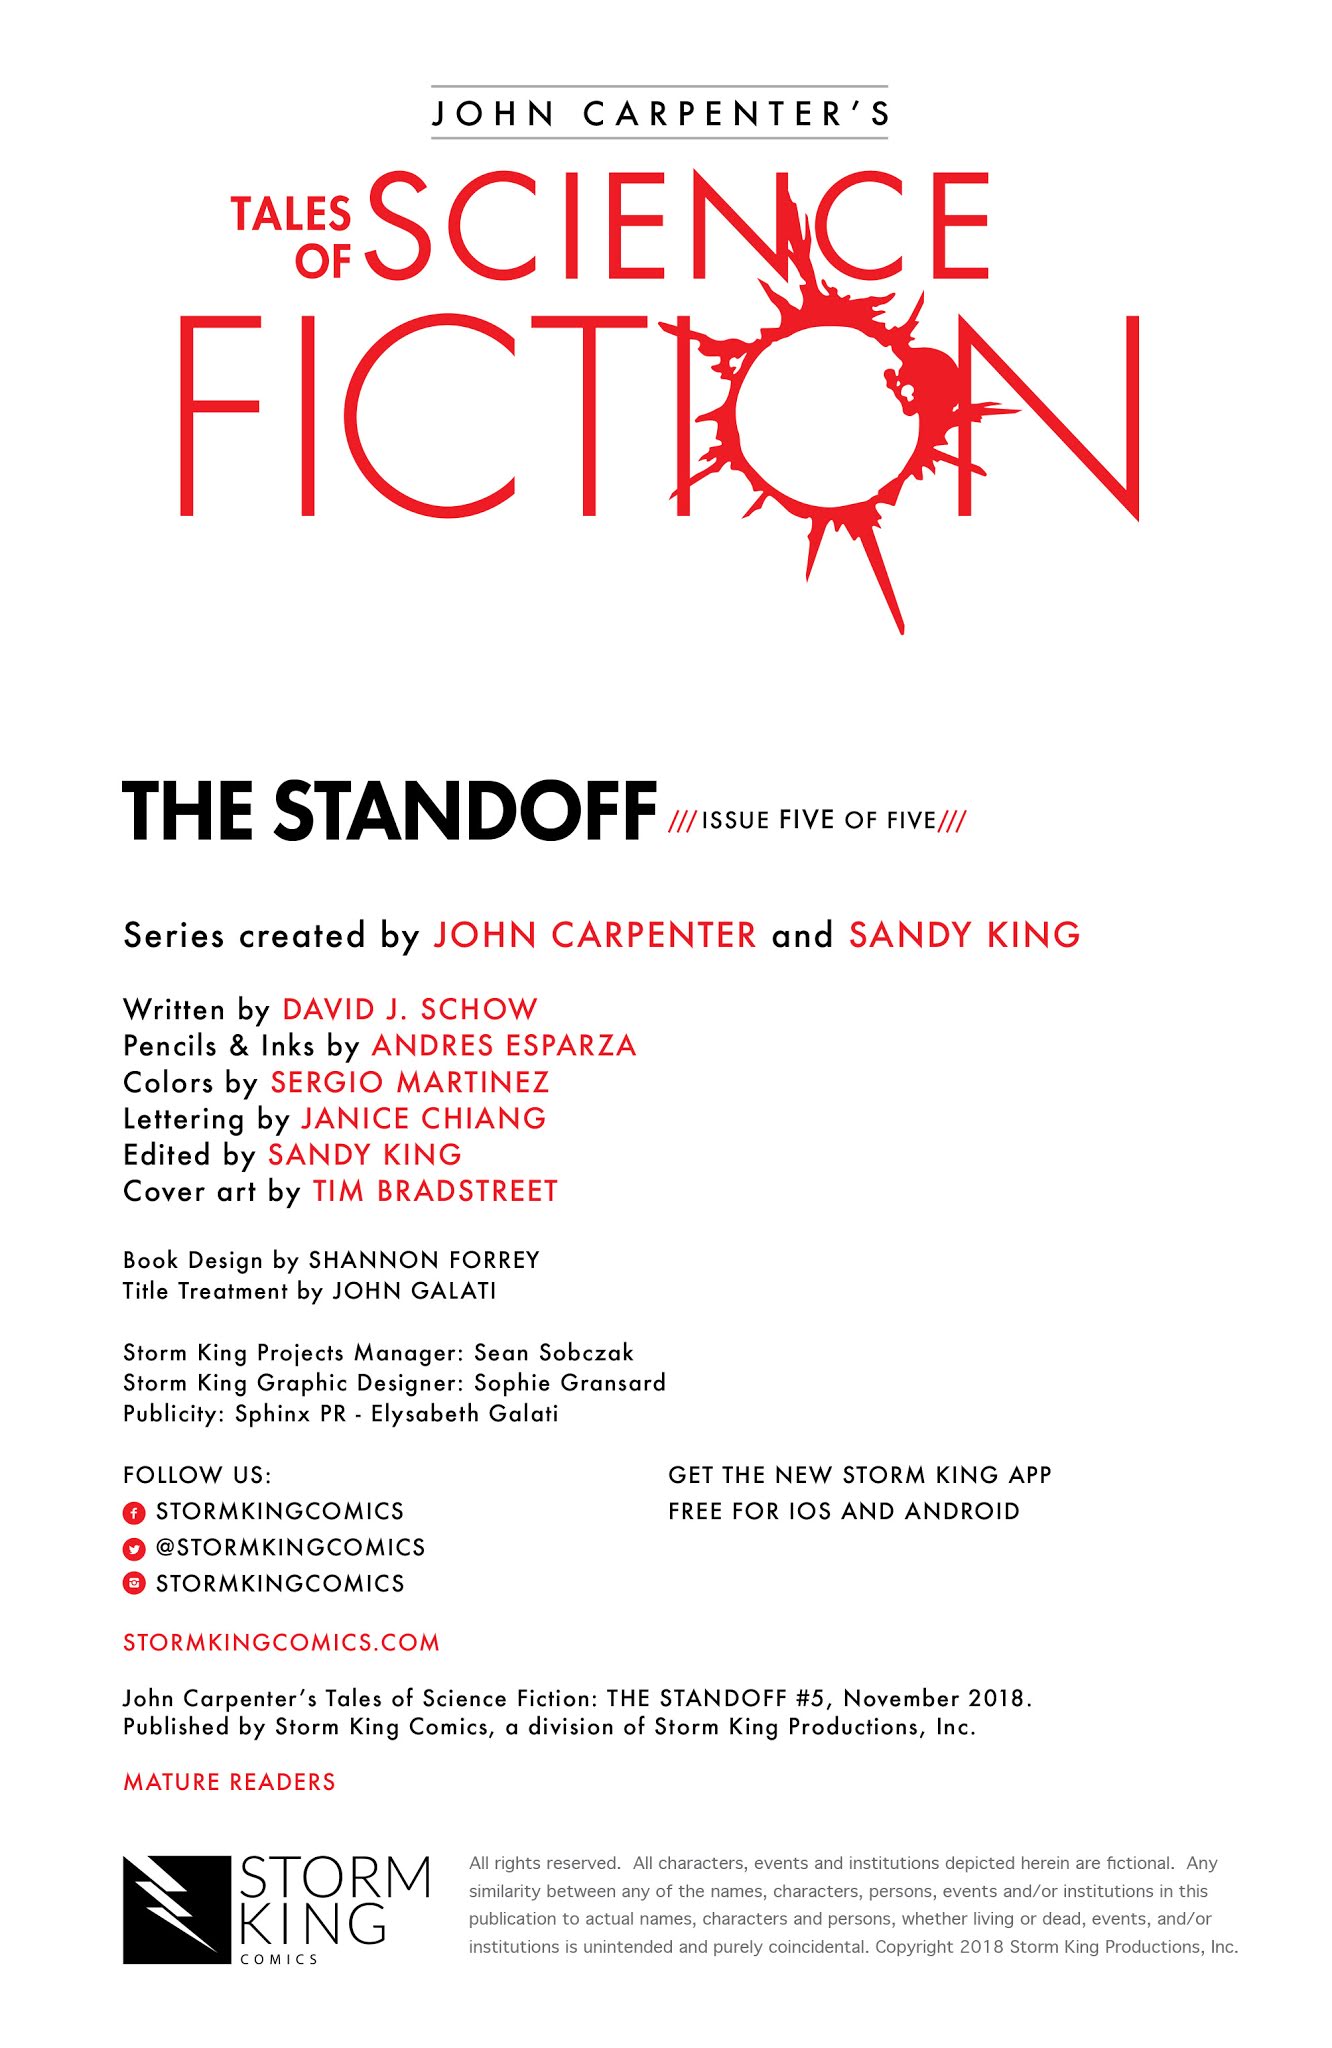 Read online John Carpenter's Tales of Science Fiction: The Standoff comic -  Issue #5 - 2